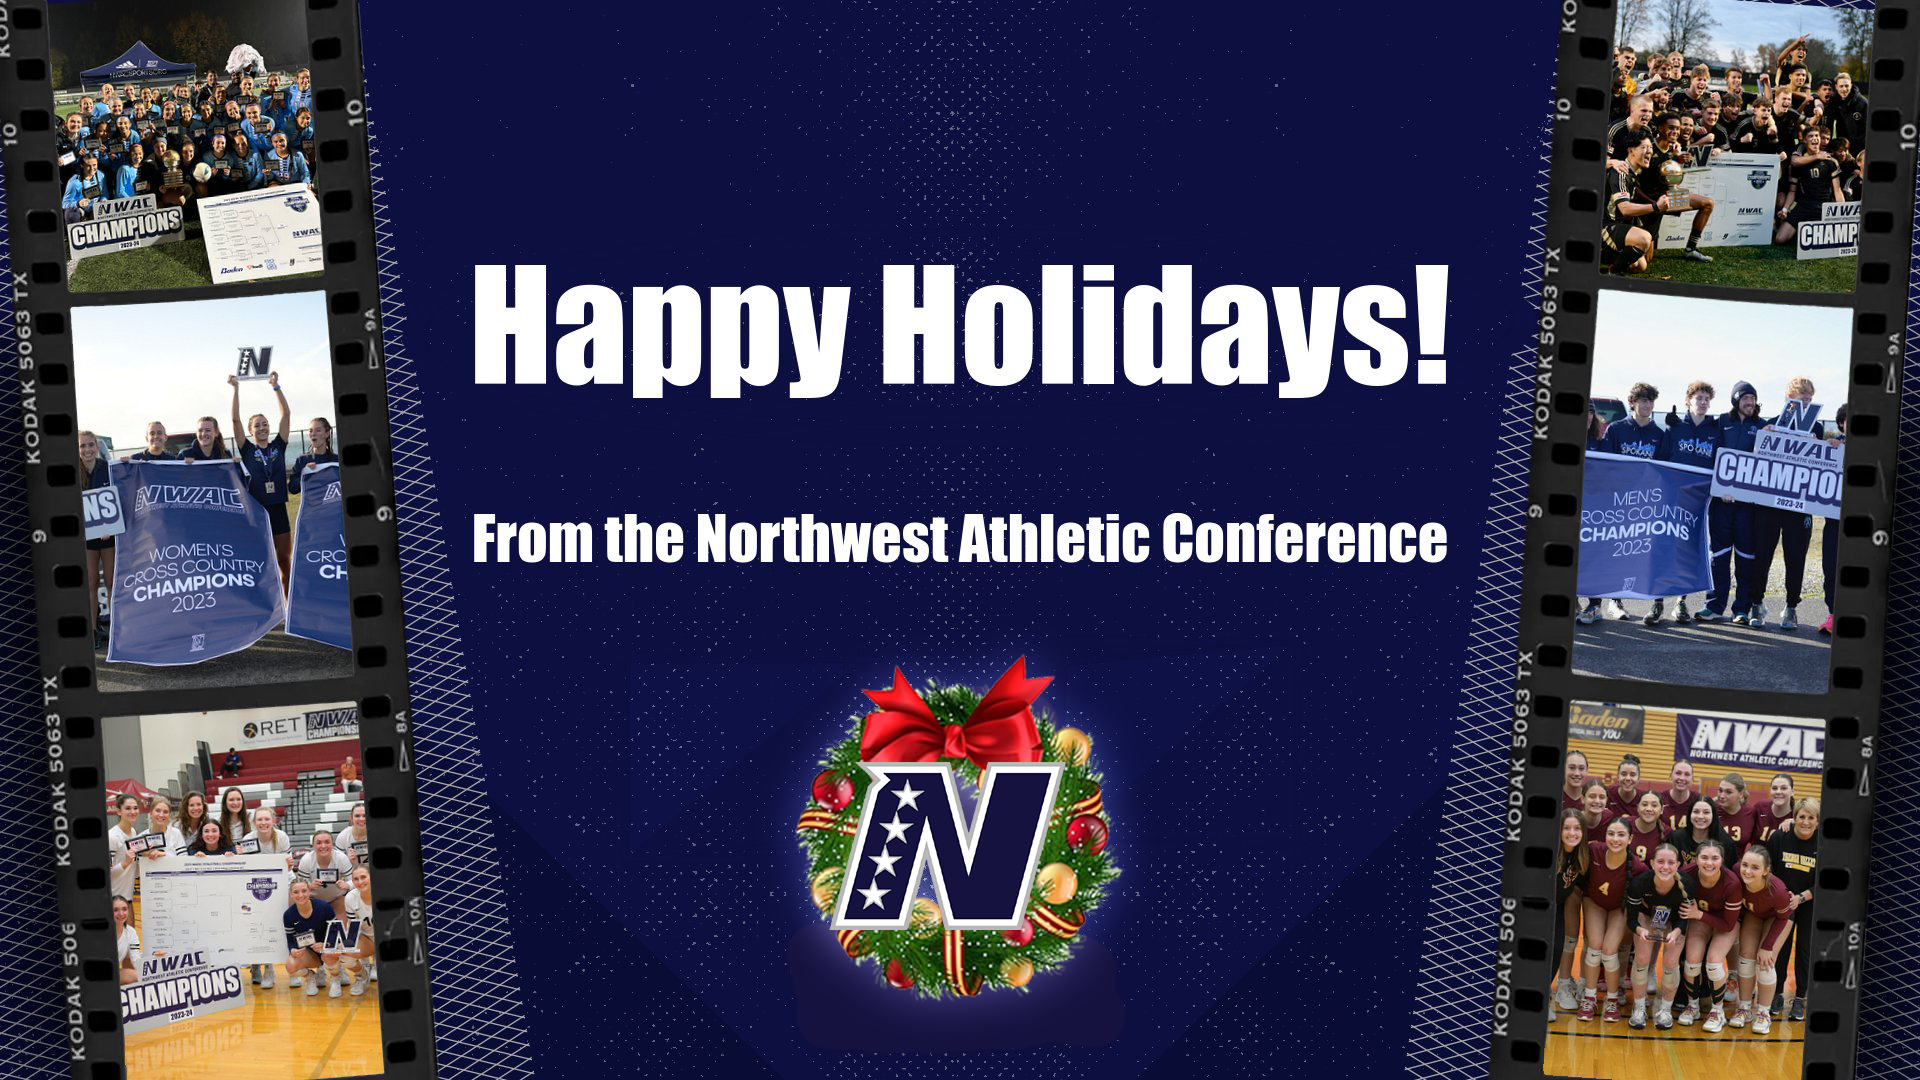 Happy Holidays from the NWAC!